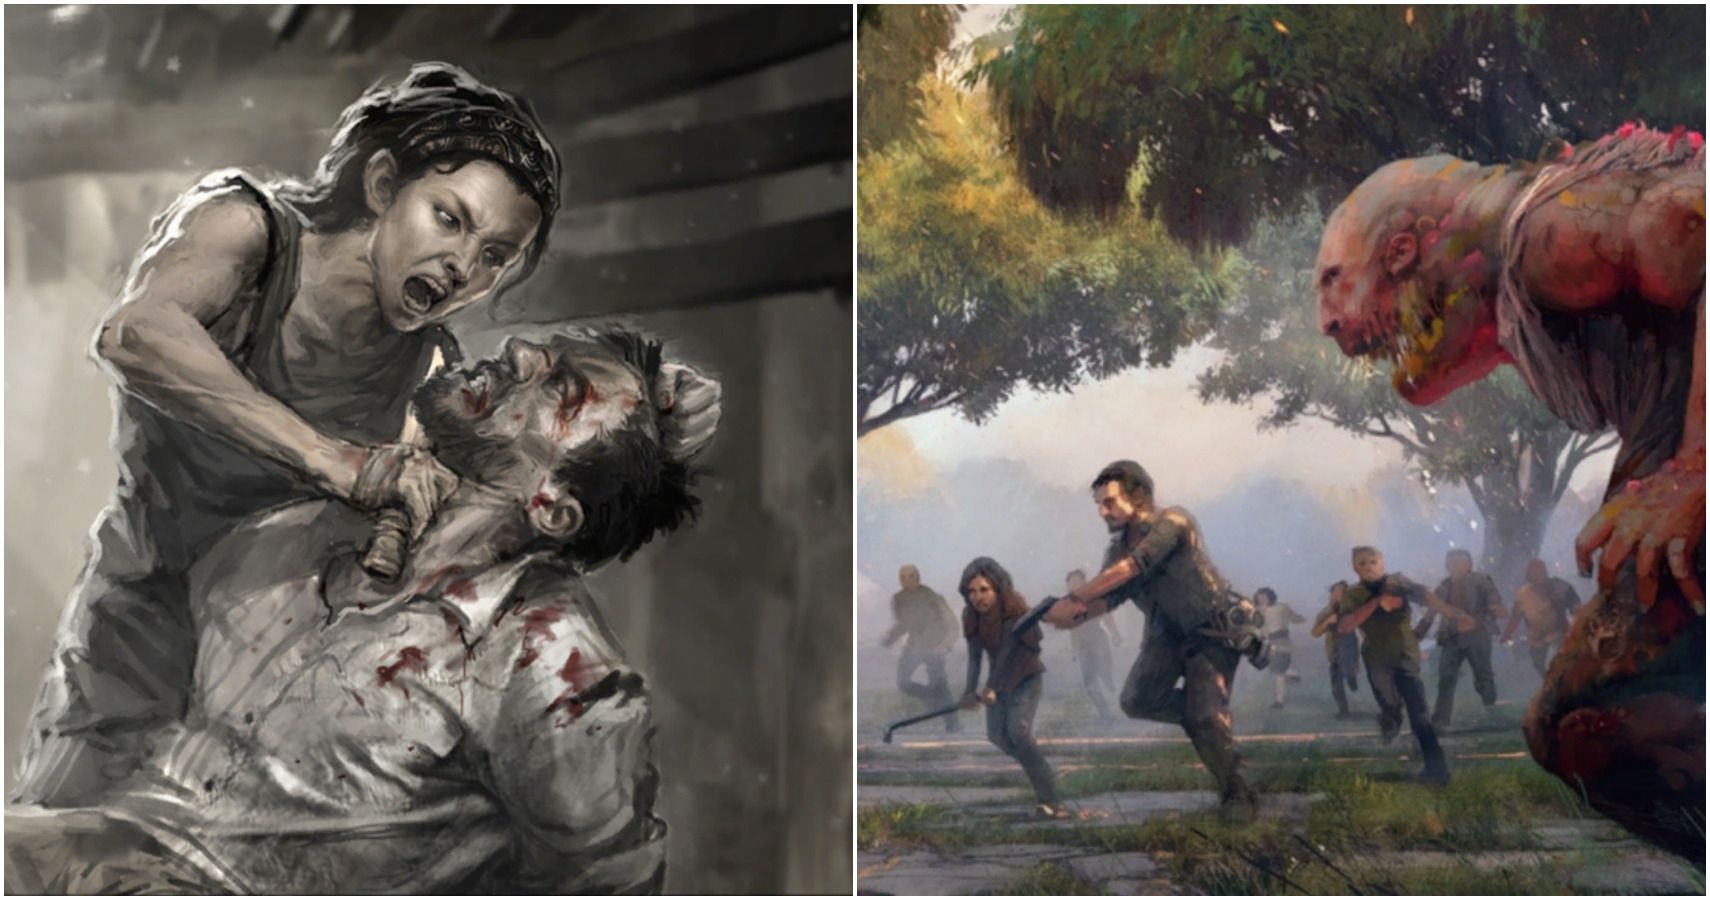 Joel and Tommy Art - The Last of Us Part II Art Gallery